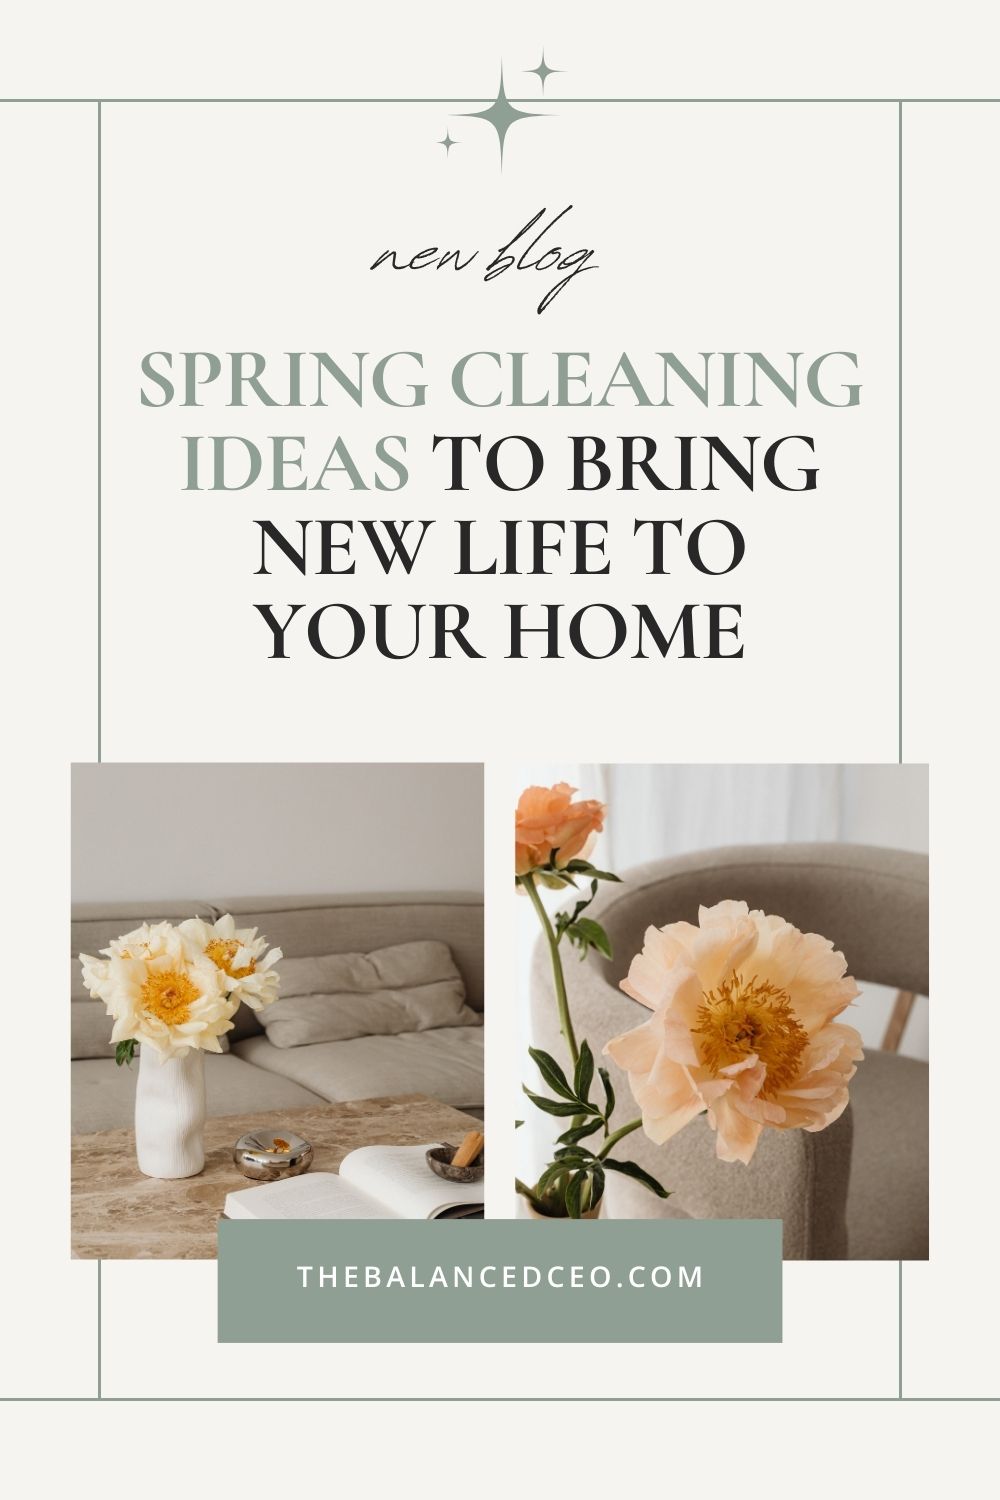 Spring Cleaning Ideas to Bring New Life to Your Home